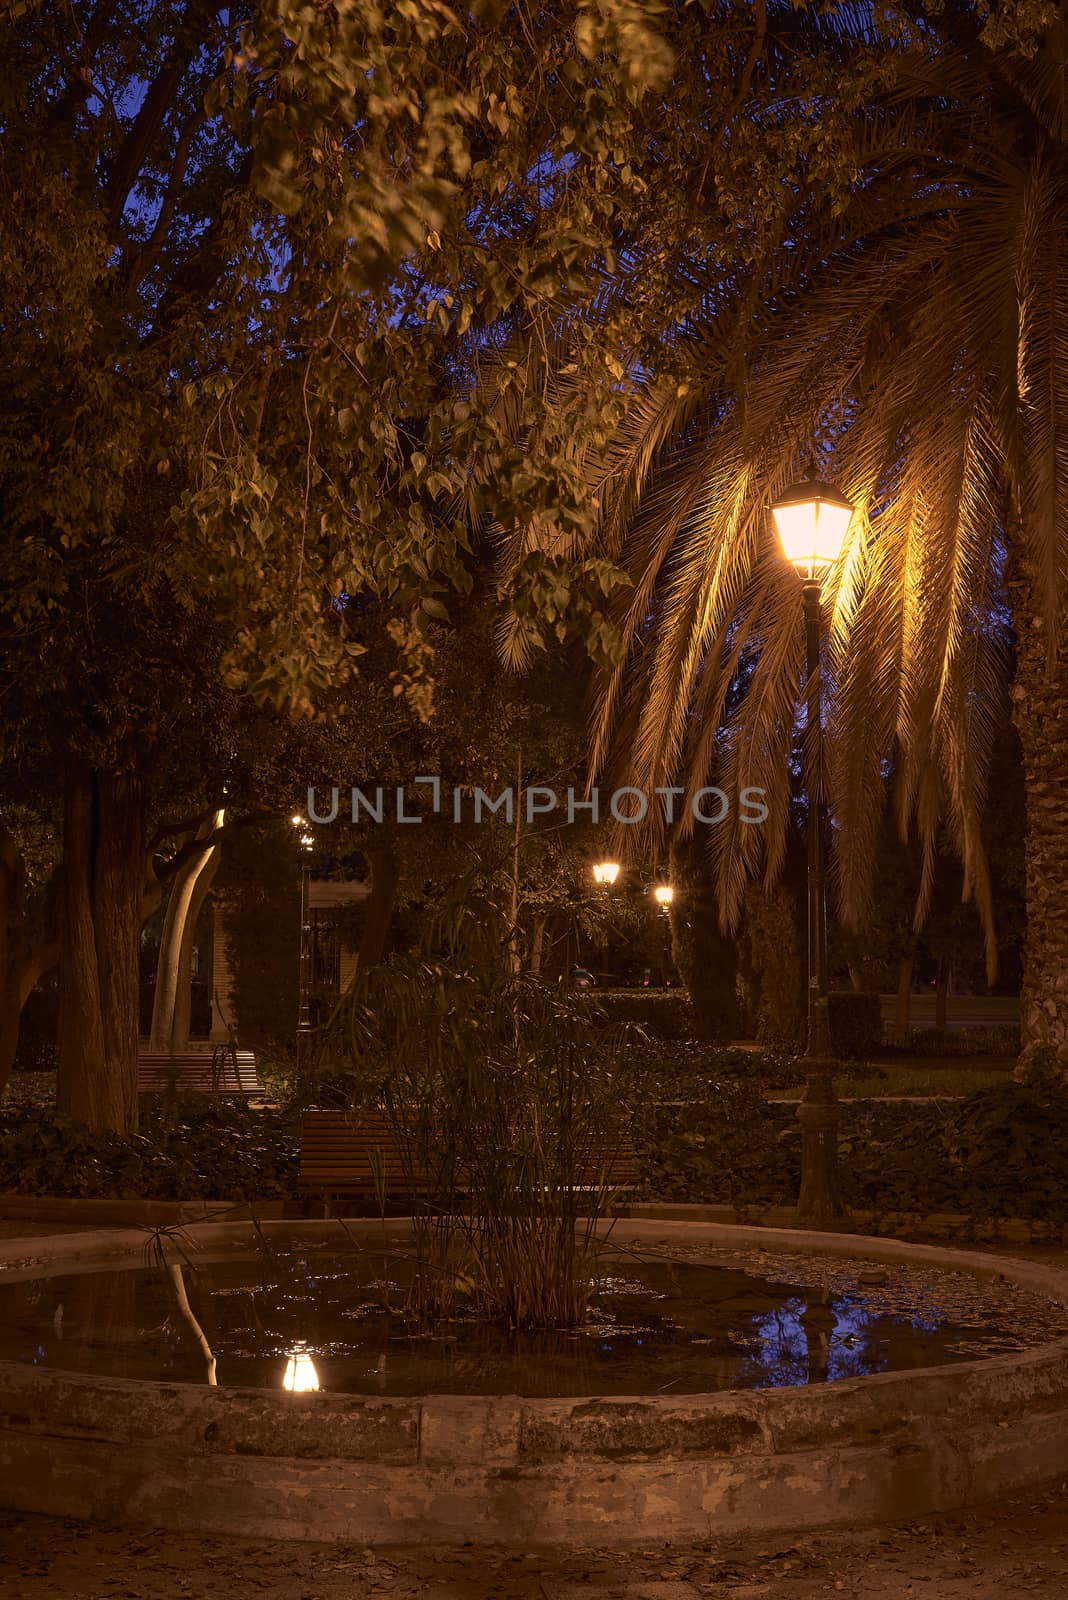 Romantic night park, with fountain and lamppost by raul_ruiz